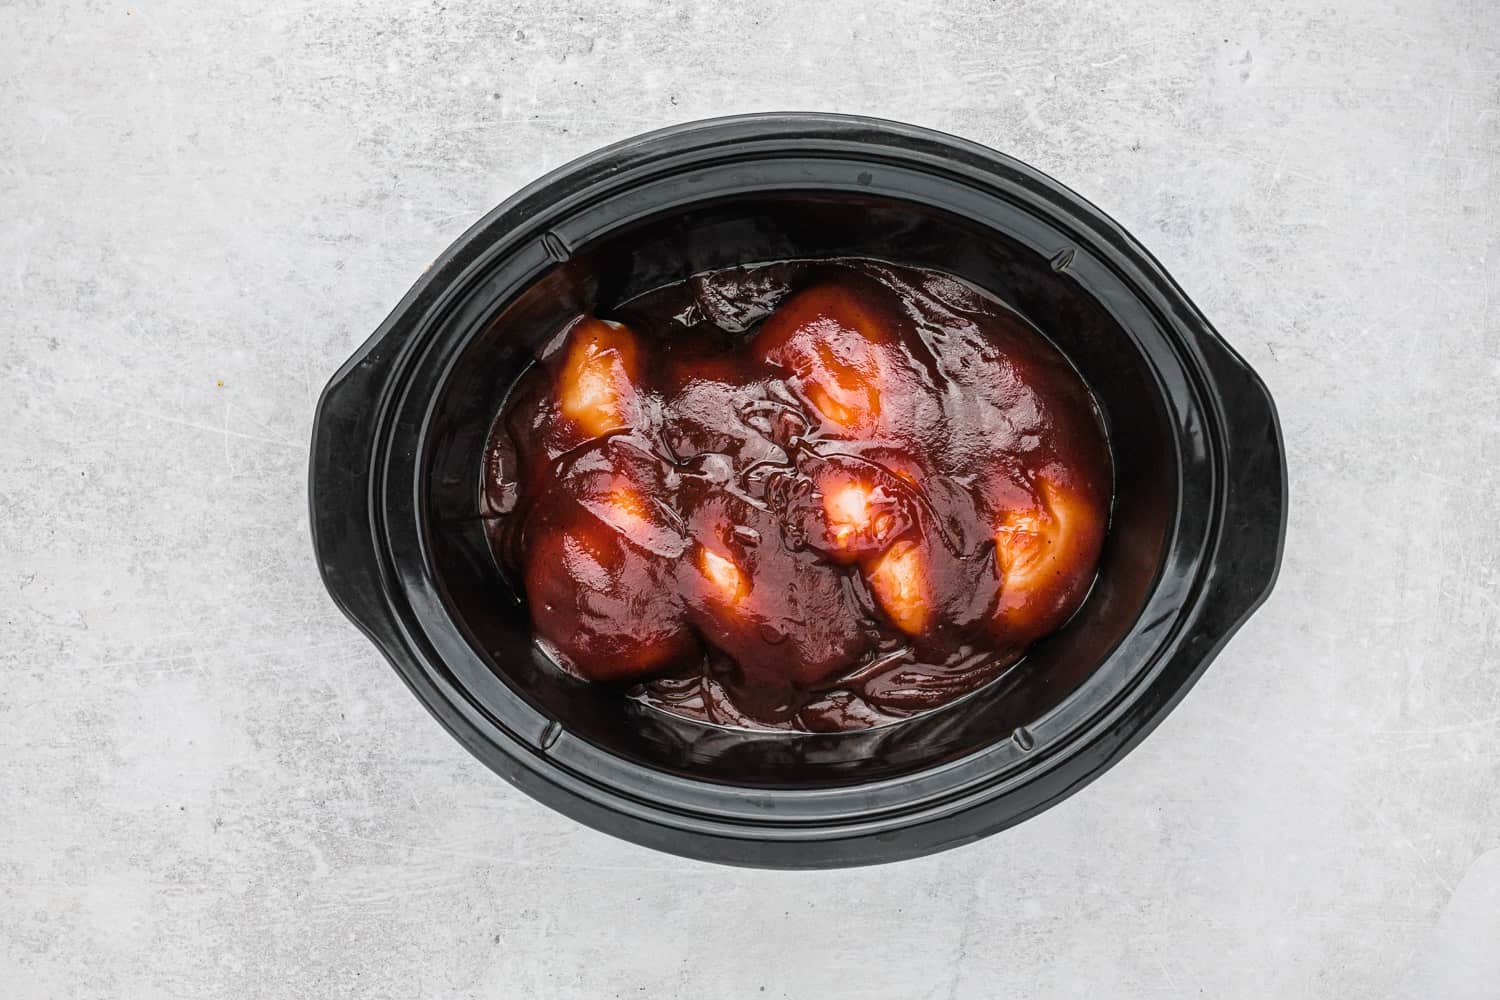 Uncooked chicken and bbq sauce in a slow cooker.